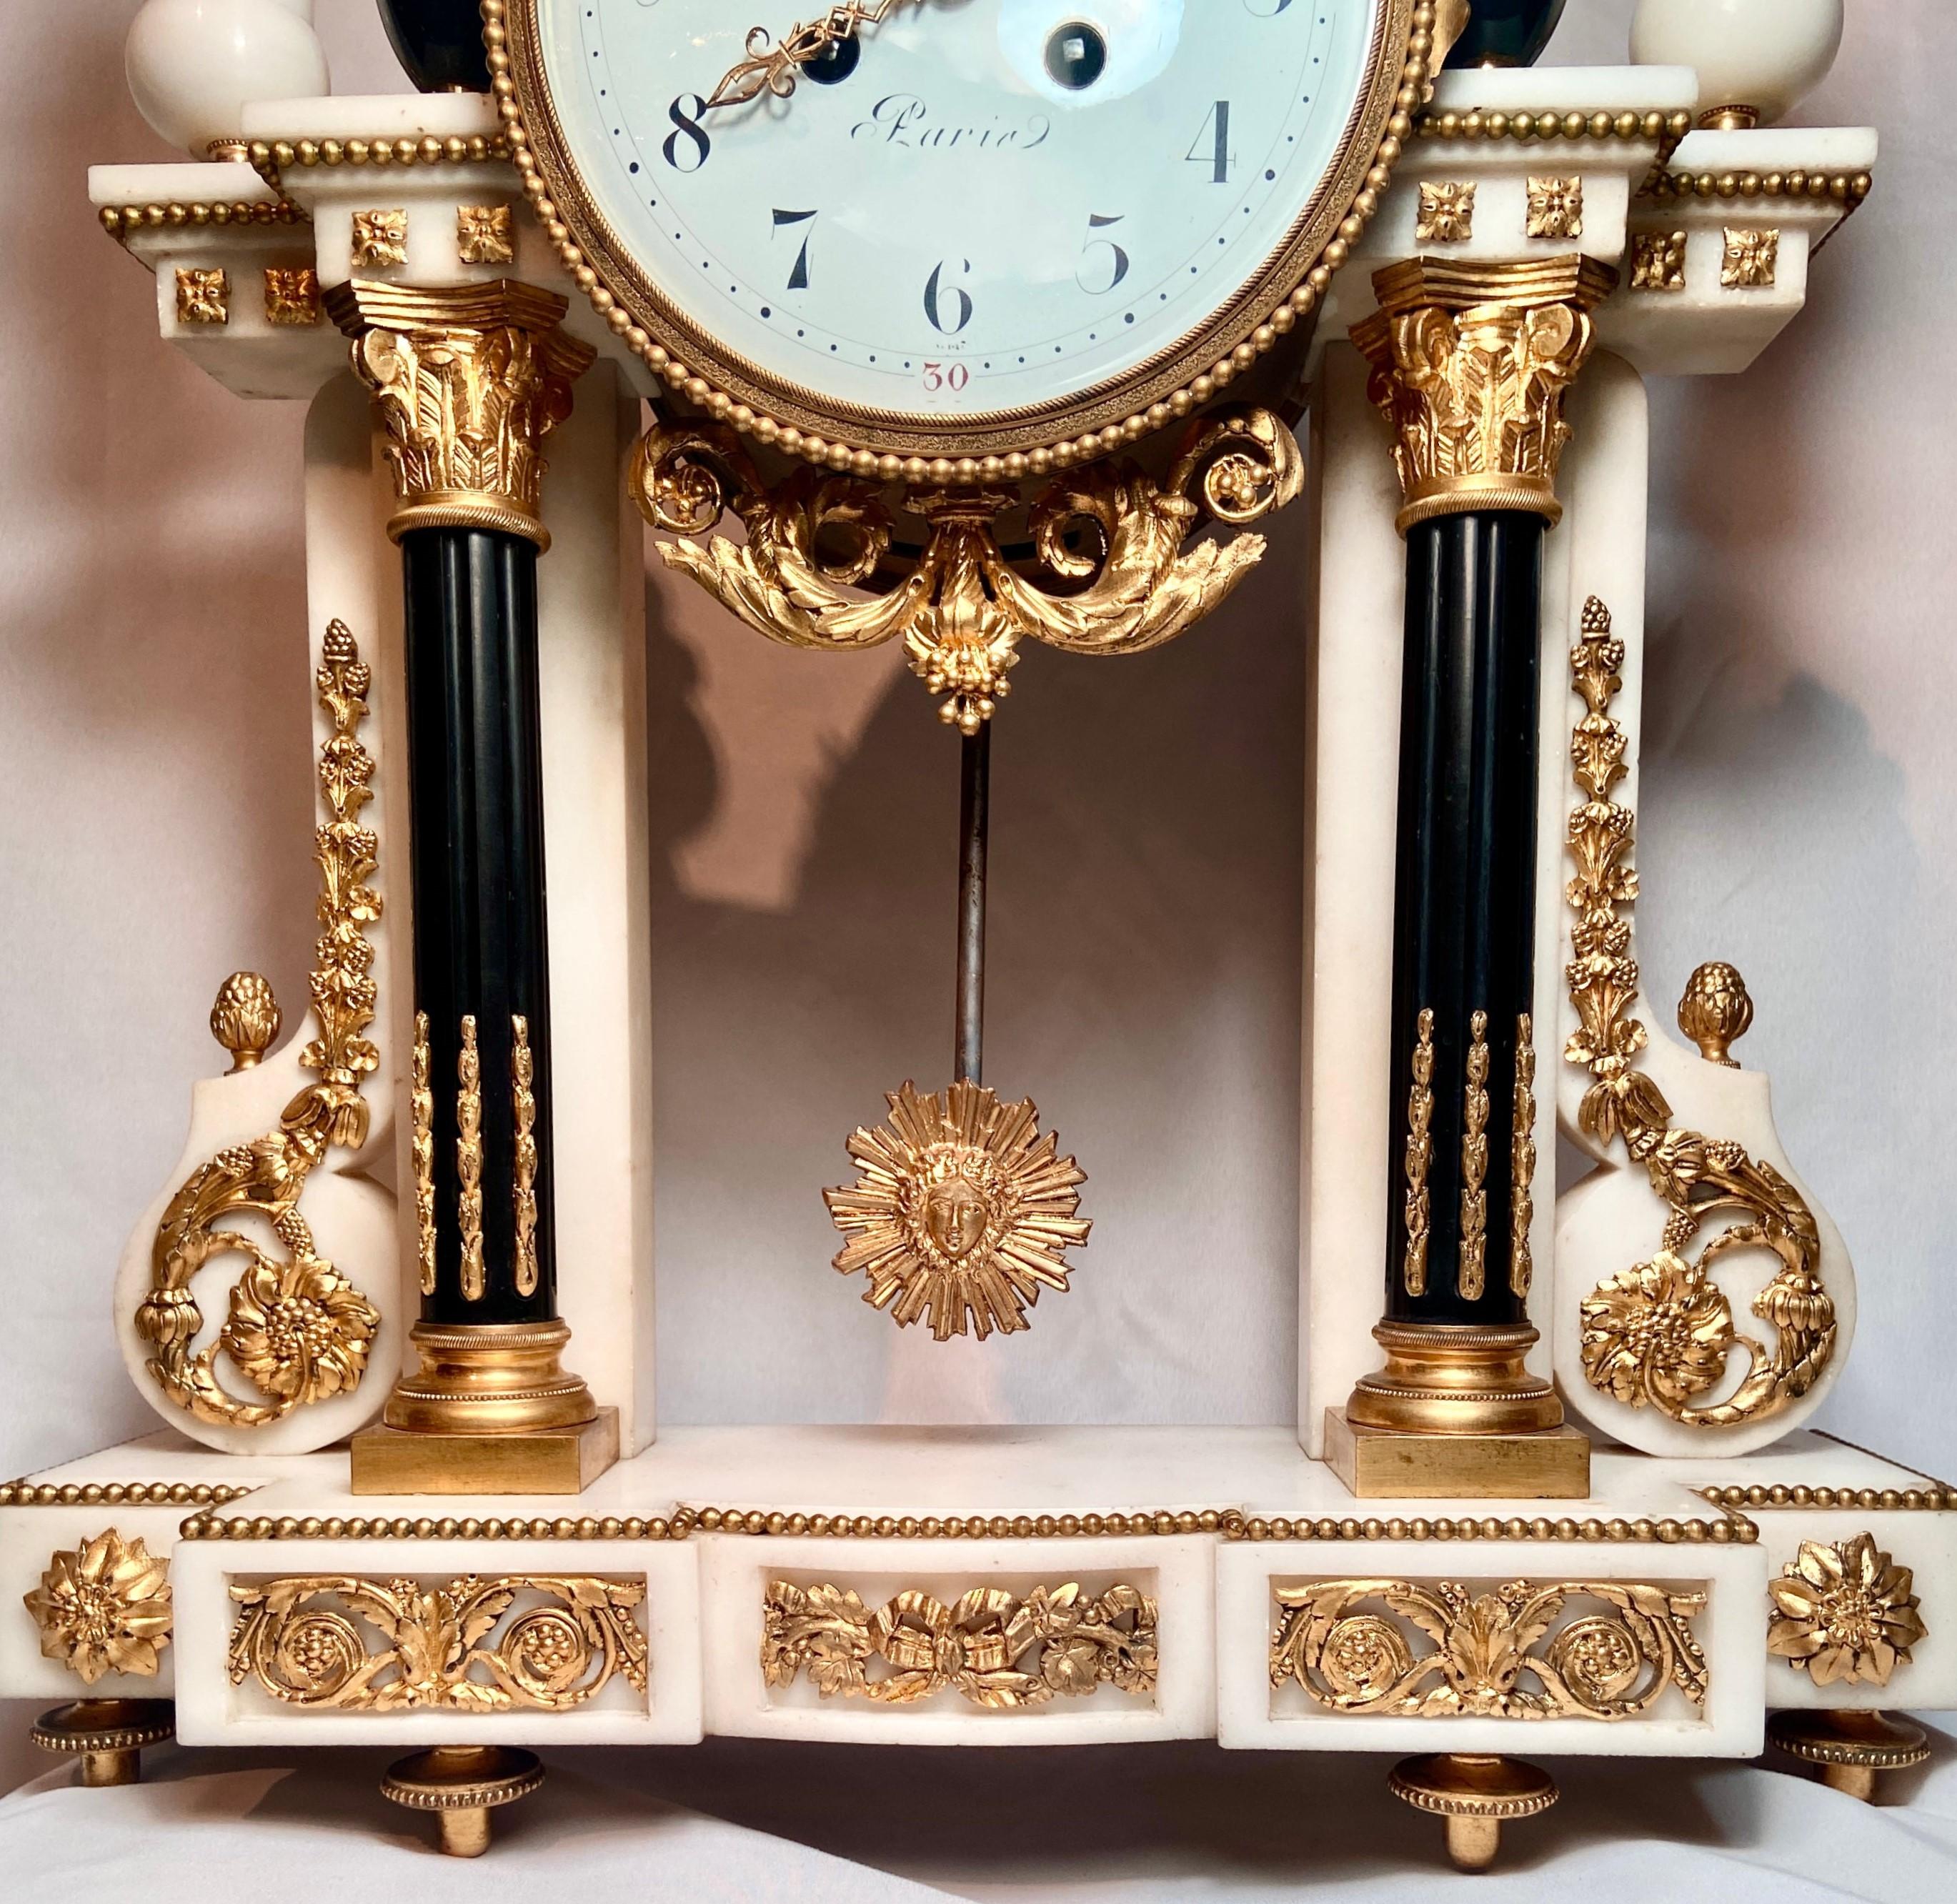 19th Century Antique French Louis XVI Ormolu and Marble Mantel Clock, circa 1850-1860 For Sale